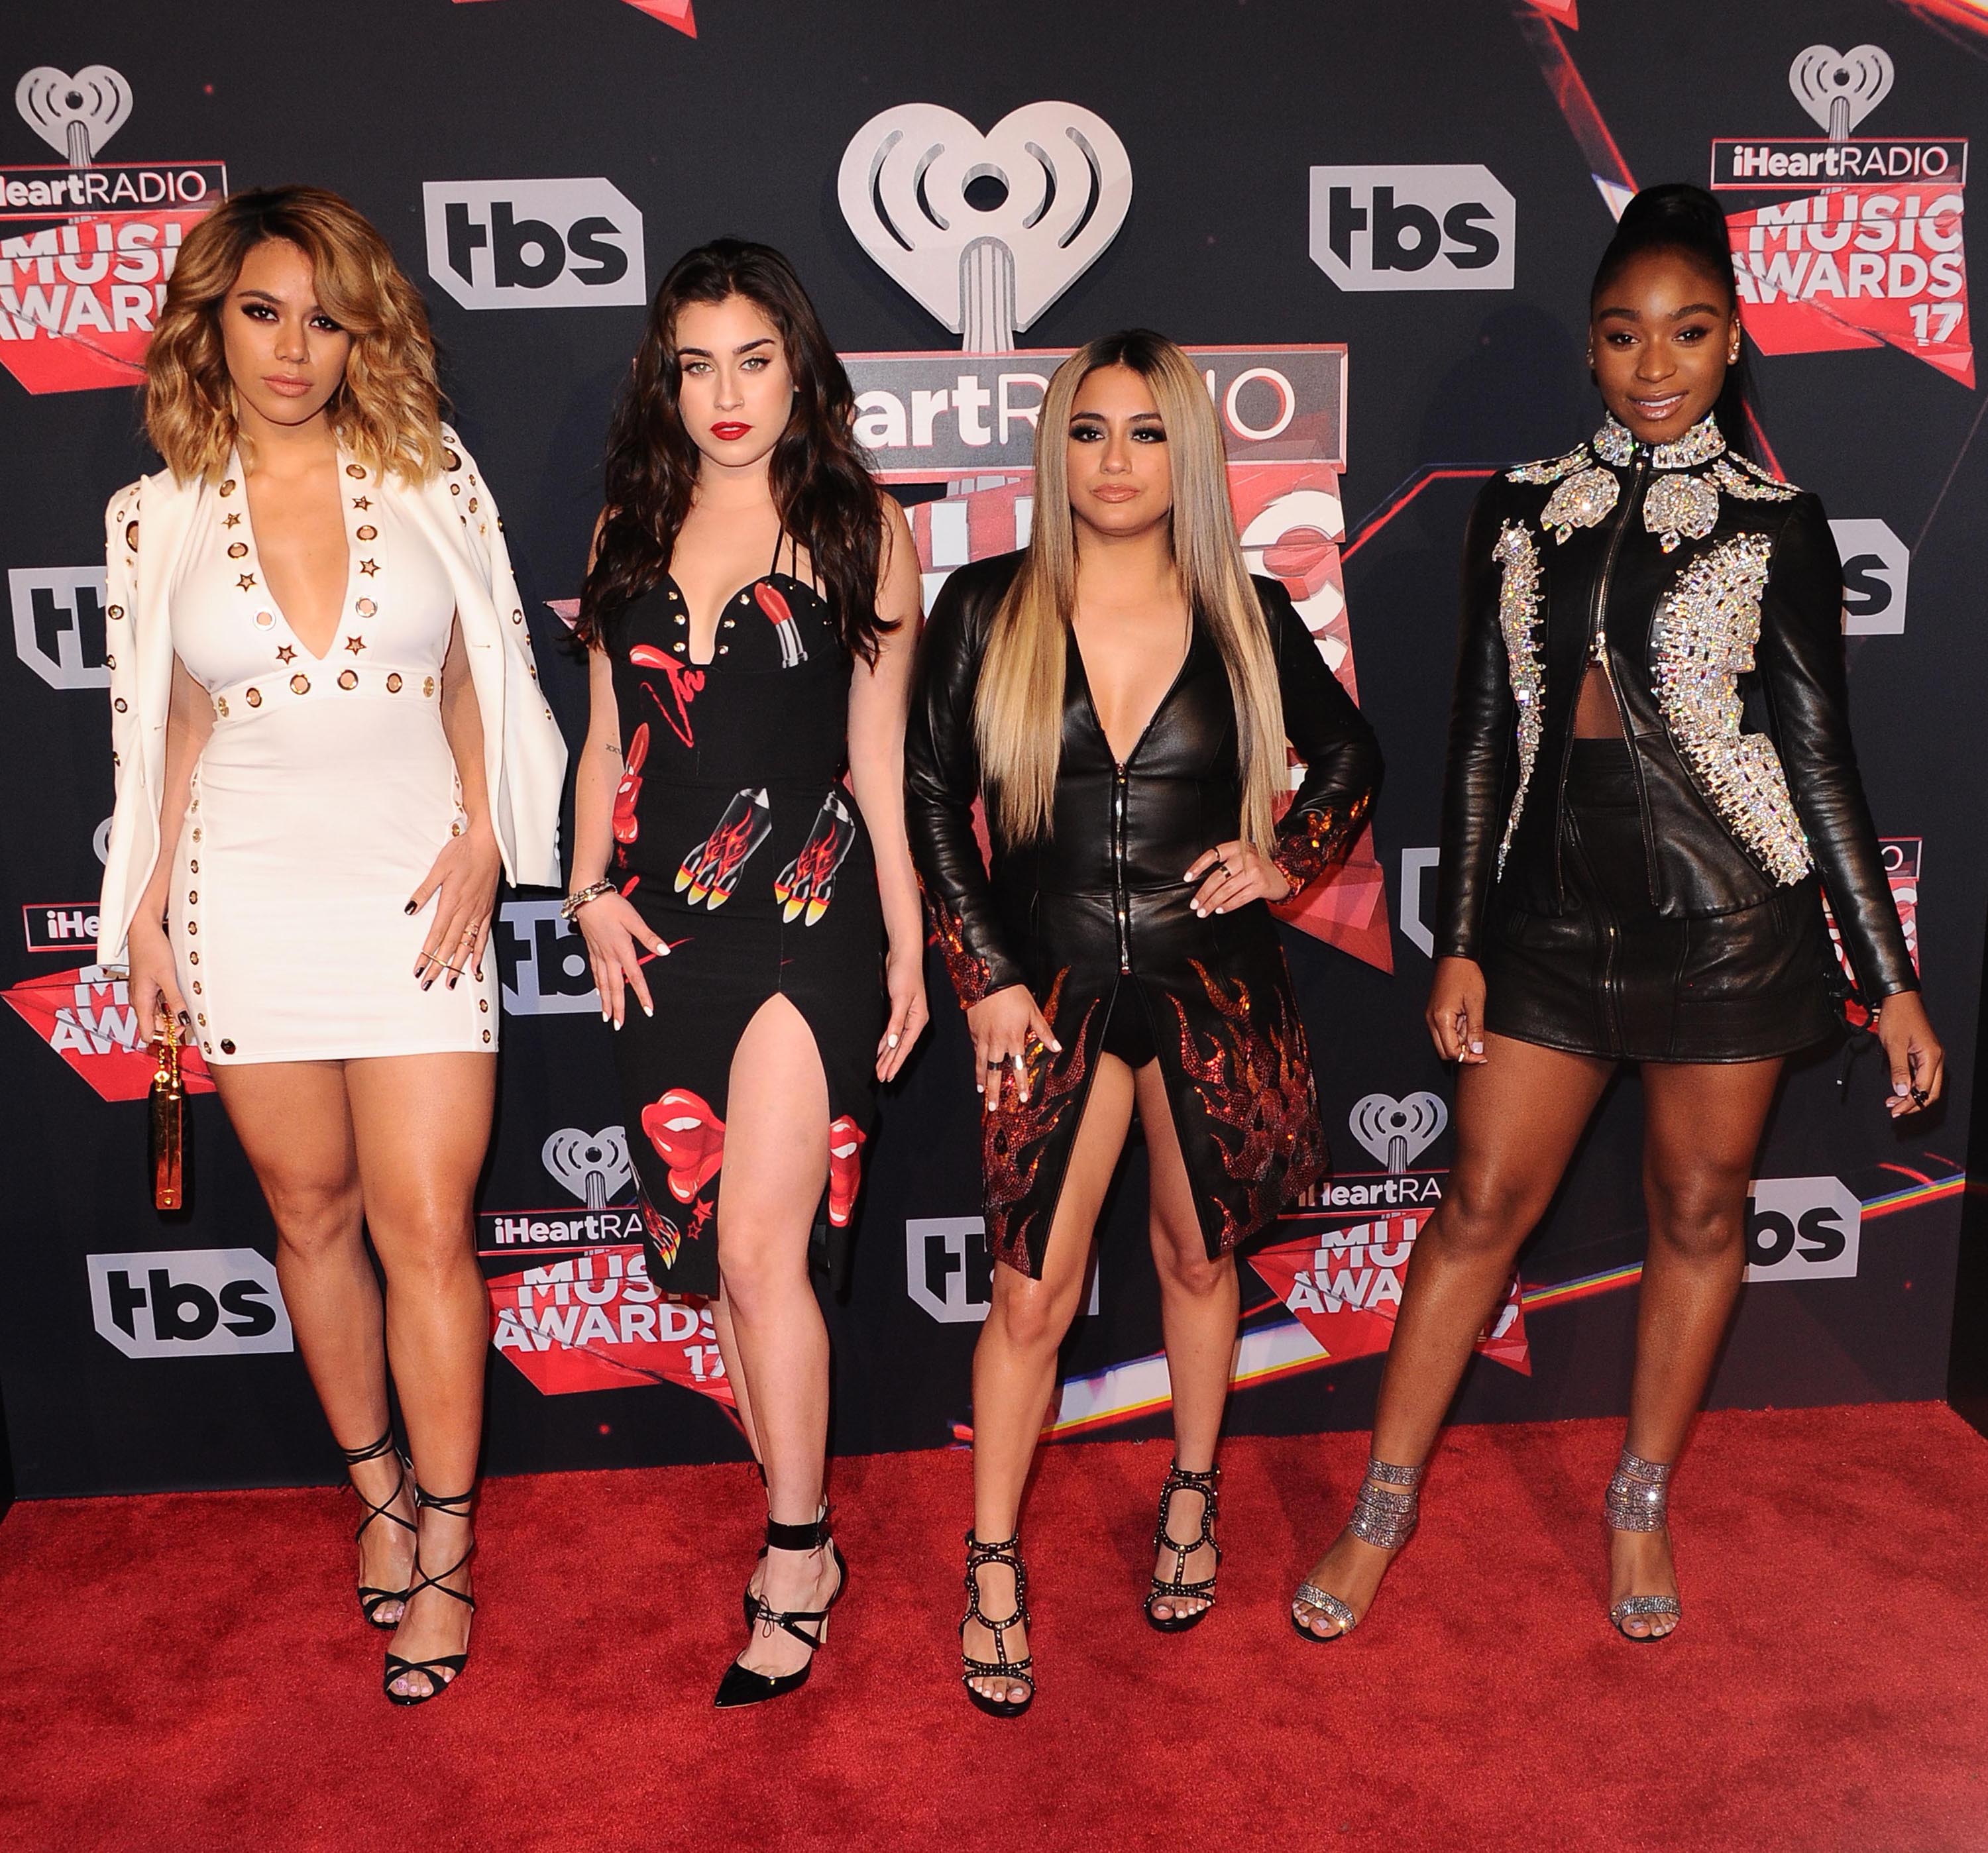 Fifth Harmony attend  iHeartRadio Music Awards